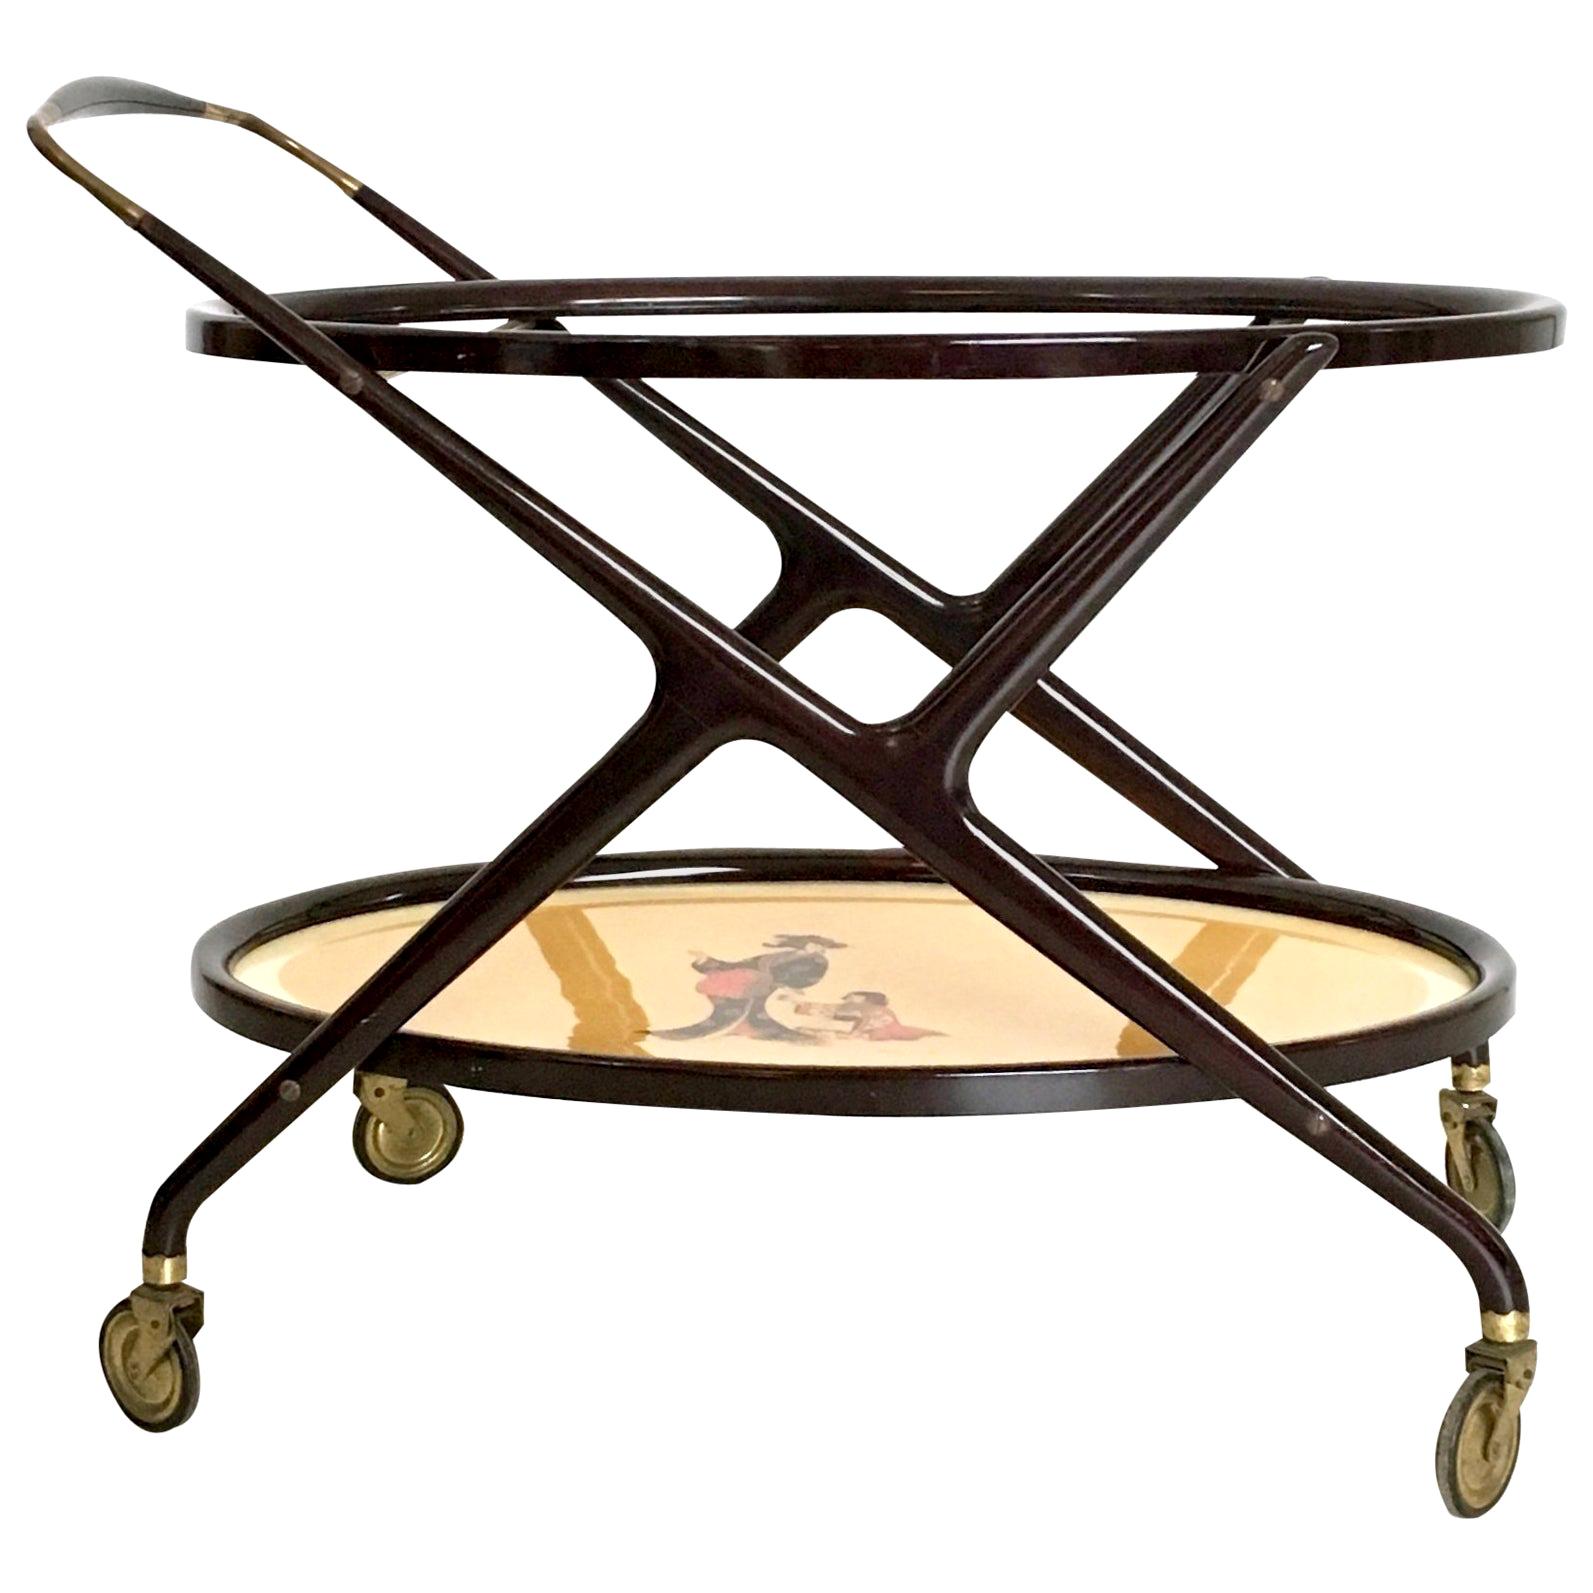 Made in Italy, 1950s.
It features an ebonized beech frame, two glass shelves (one with an oriental paint under it) and brass casters.
This is a vintage item therefore it might show slight traces of use, but it can be considered as is excellent